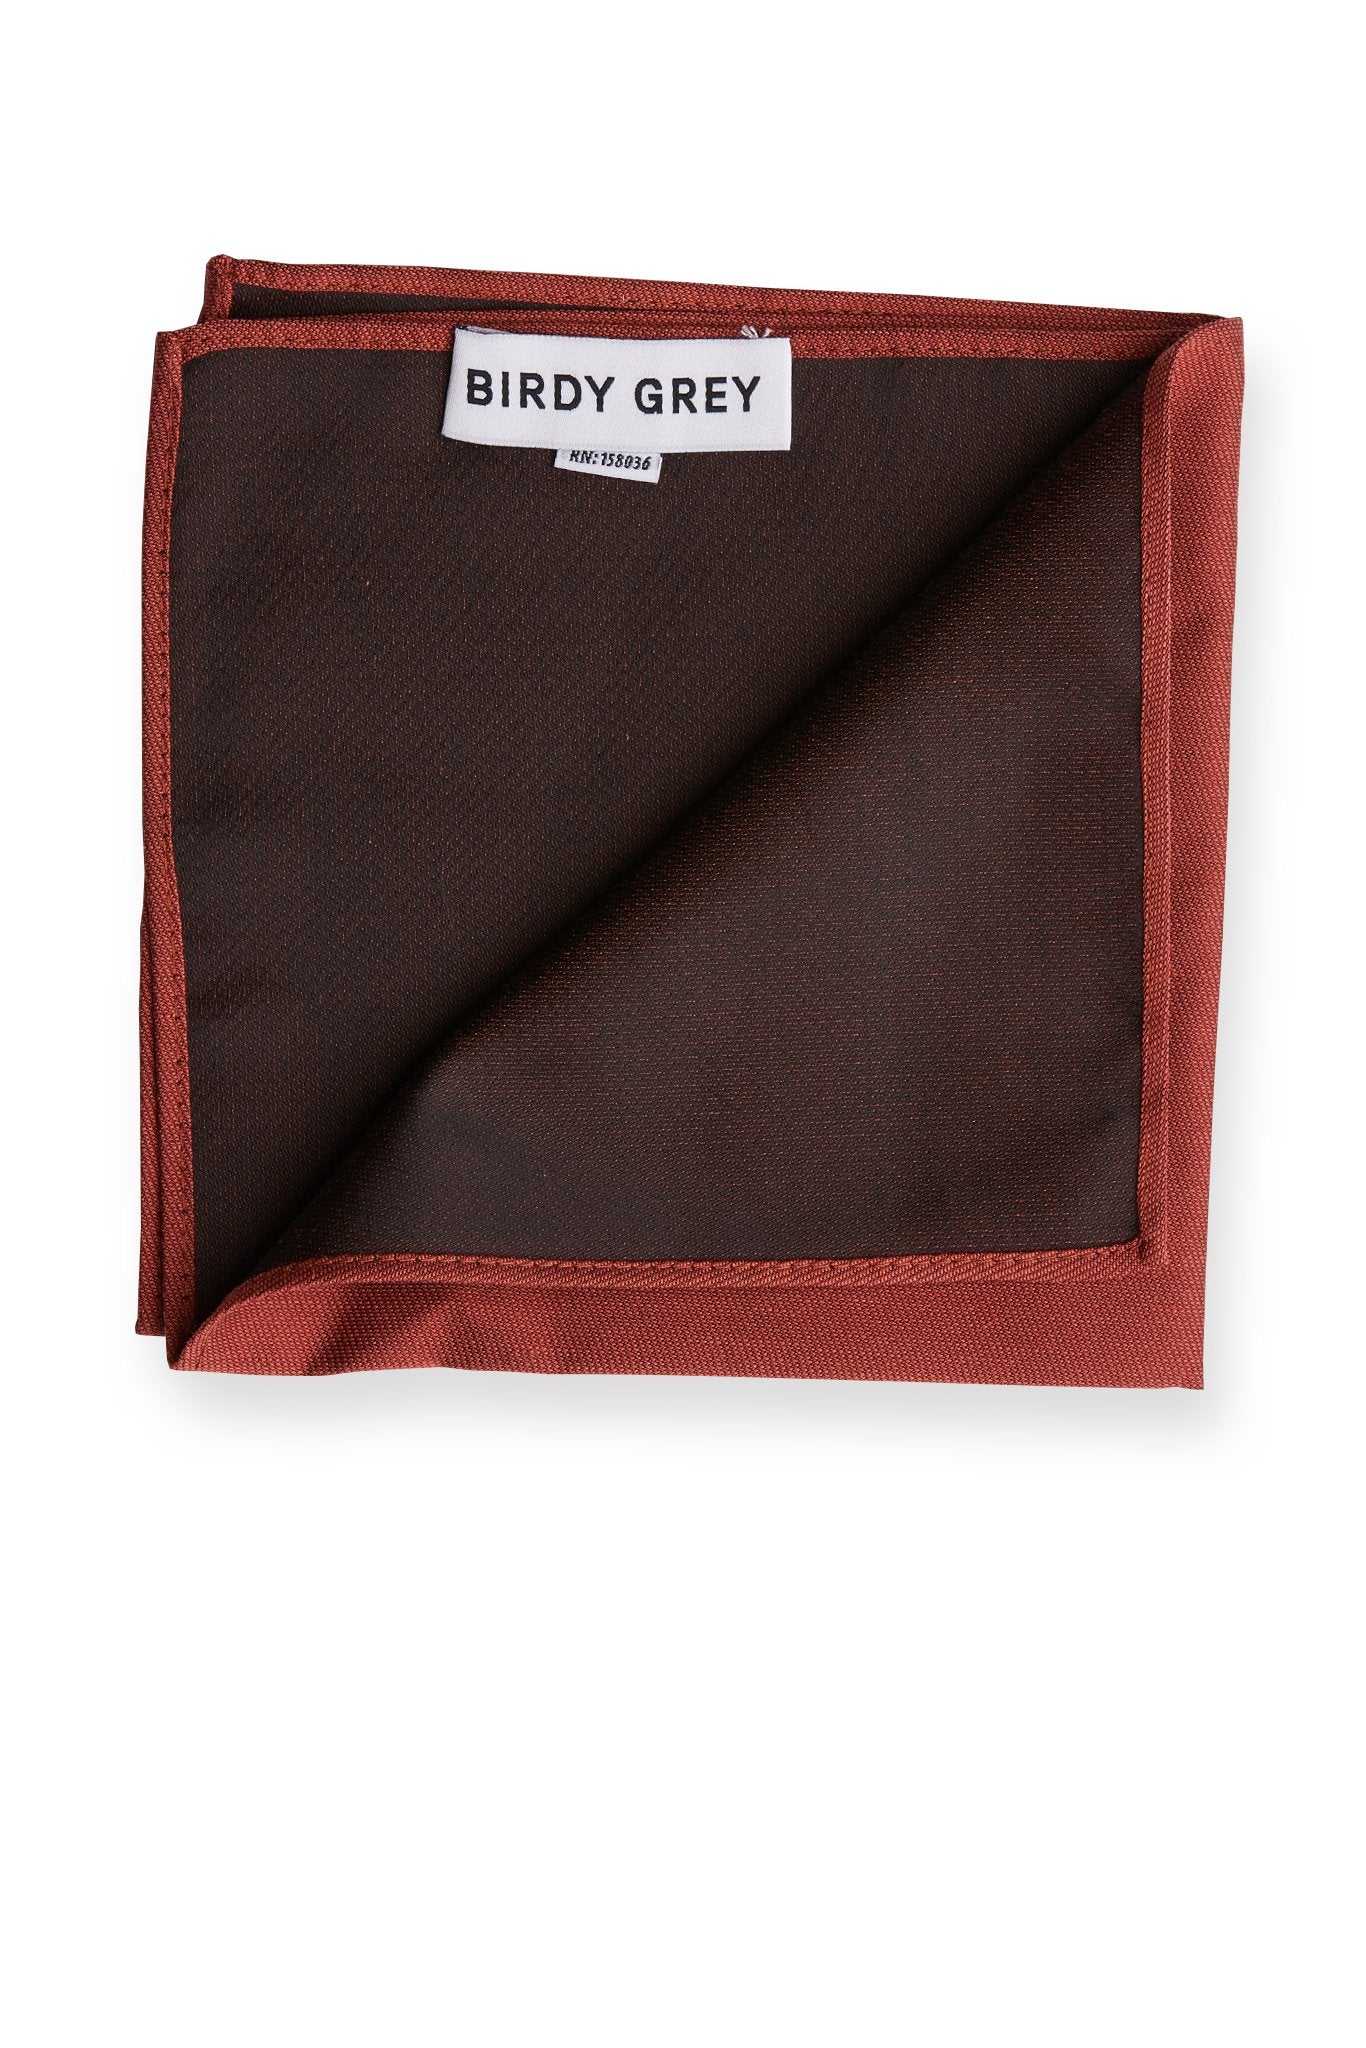 Didi Pocket Square in spice by Birdy Grey, interior view